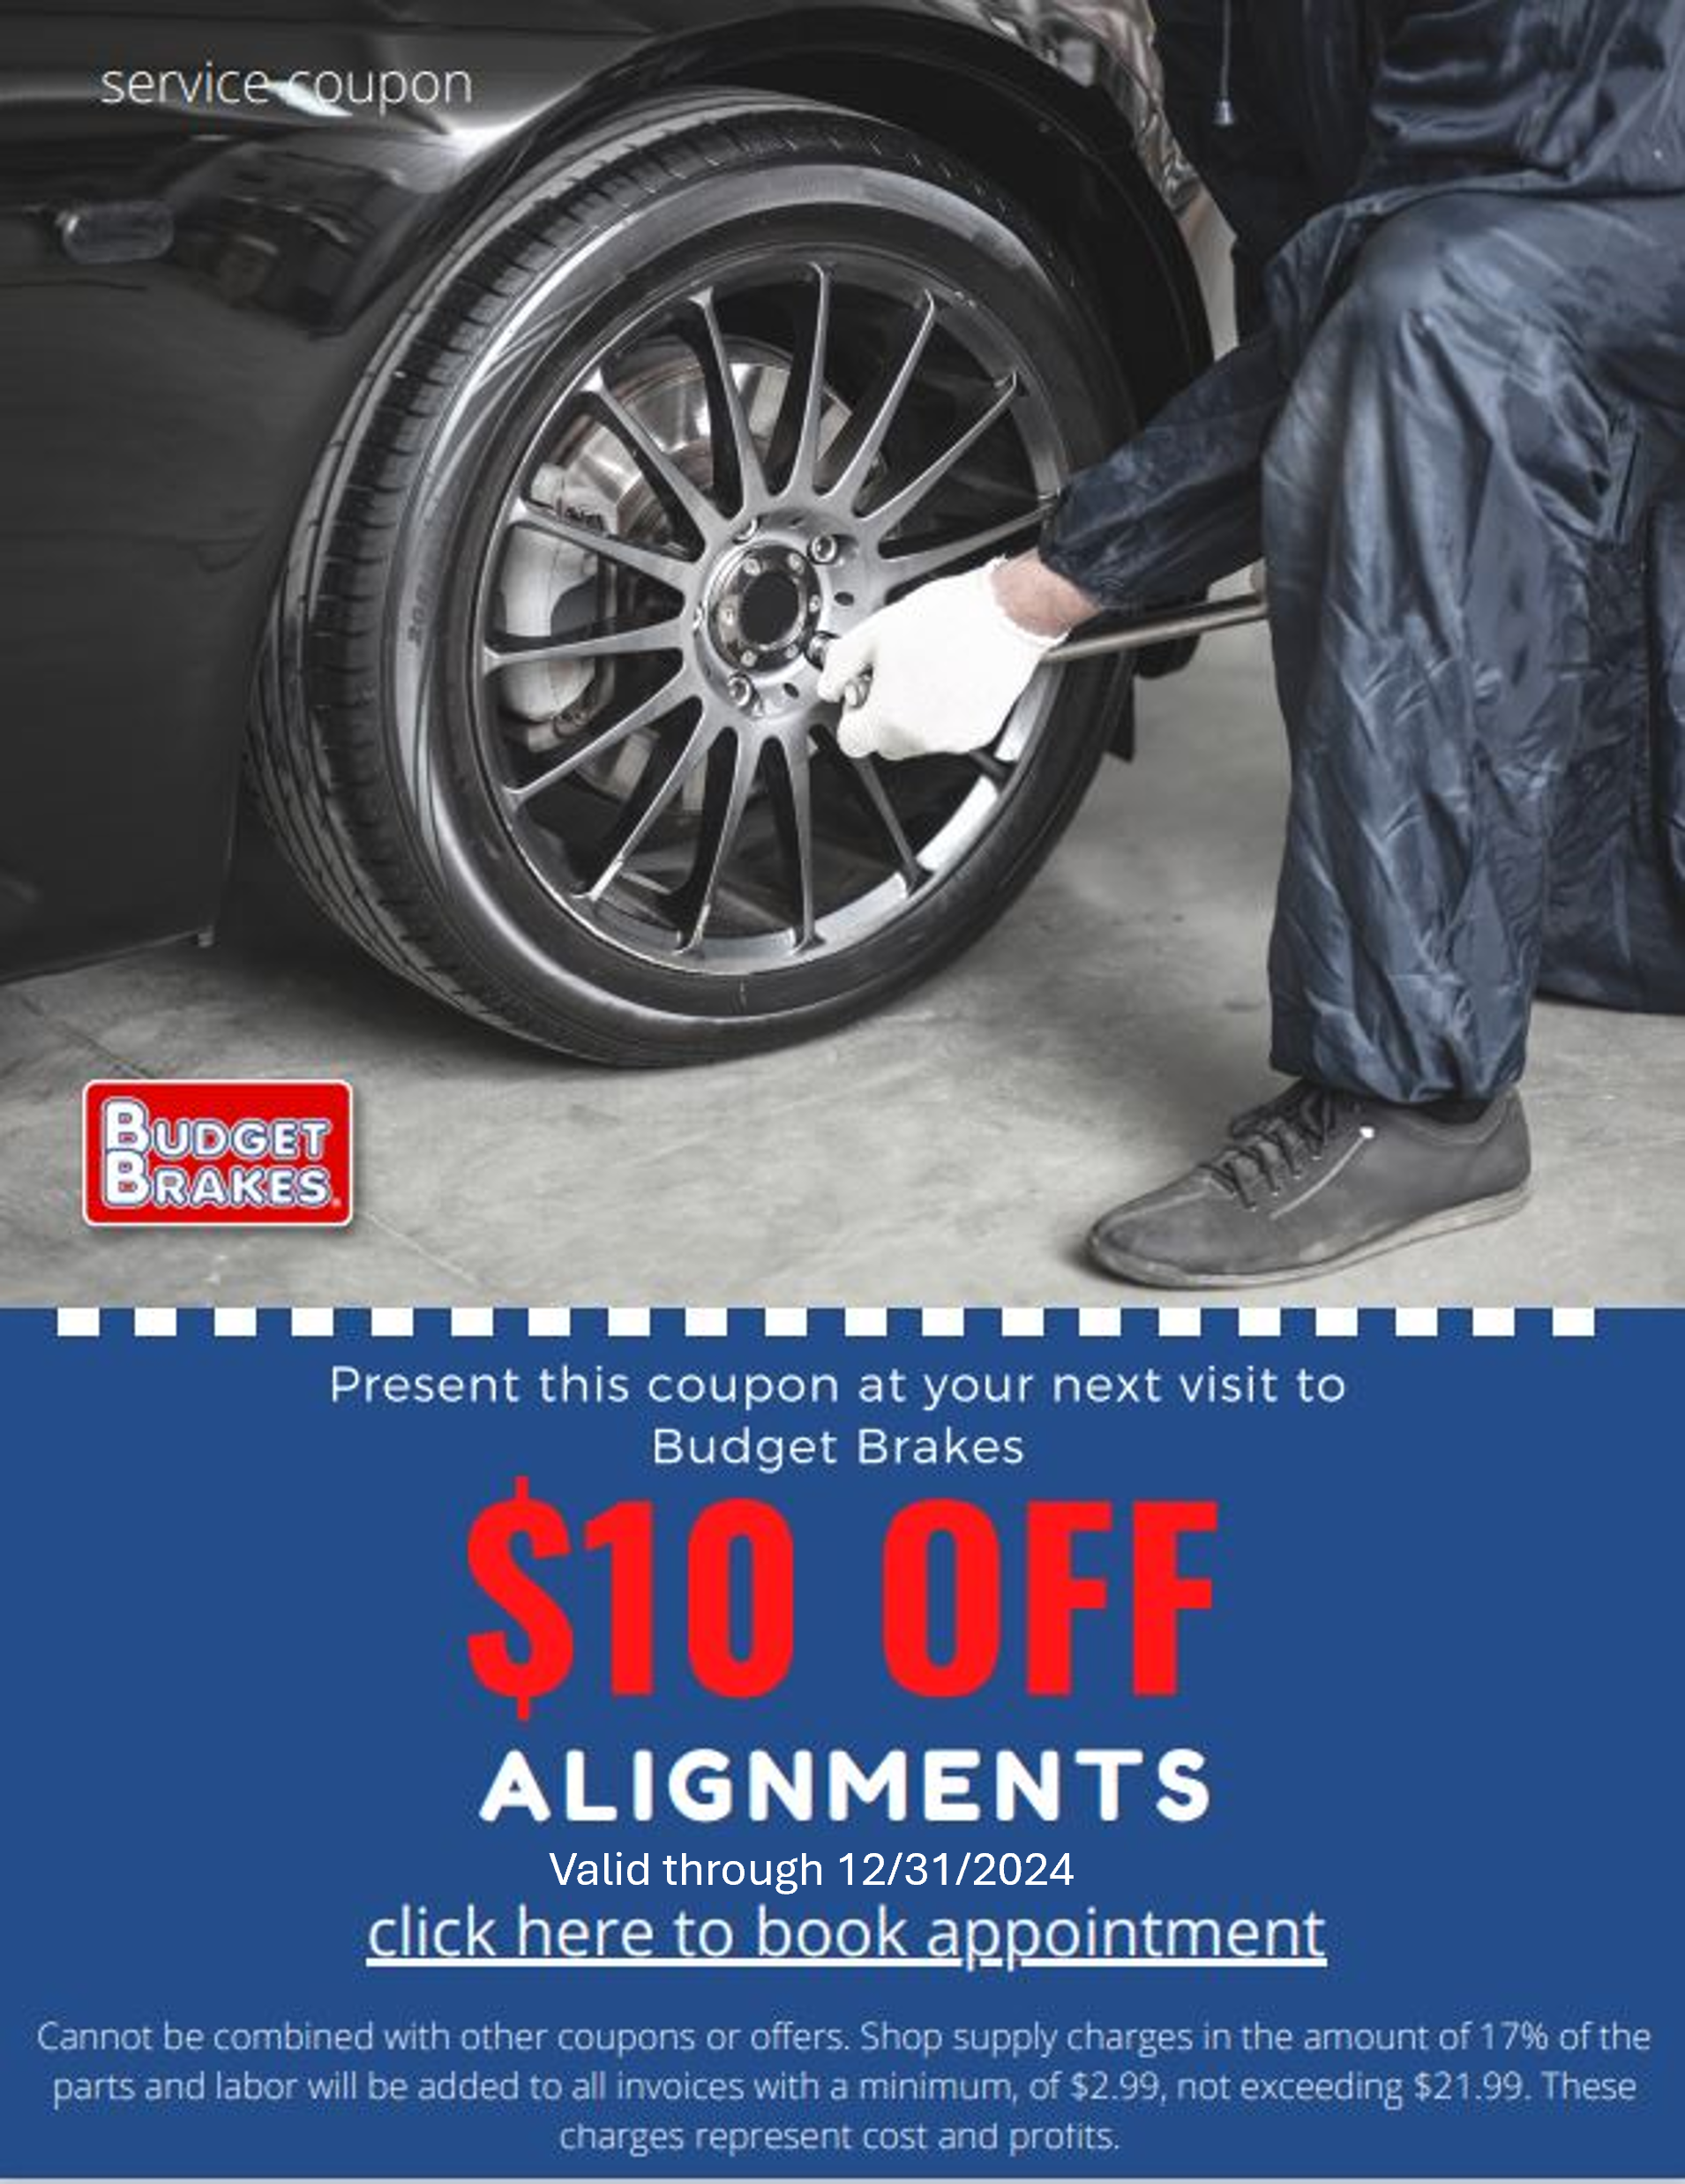 Budget Brakes $10 OFF Alignments